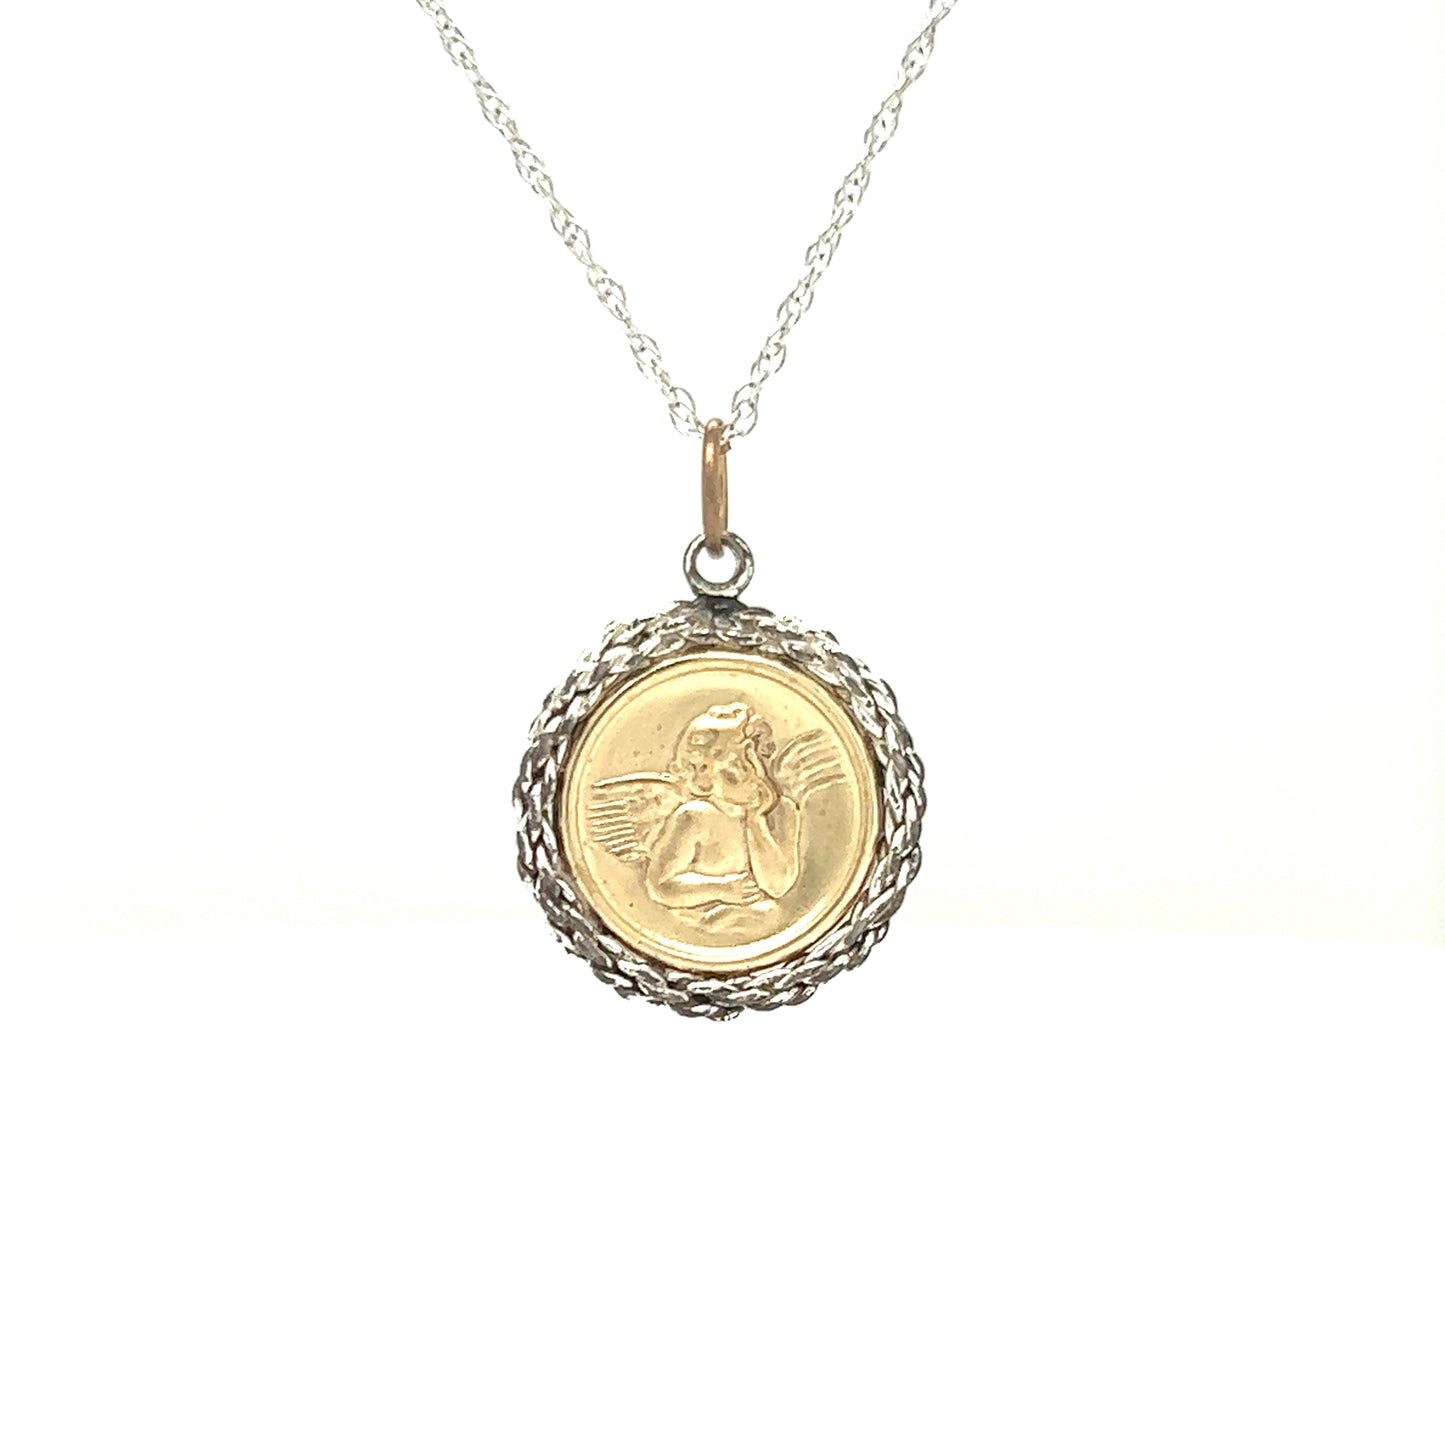 Round Angel Medallion with Textured Frame in 14K Yellow and White Gold Pendant and White Gold Chain